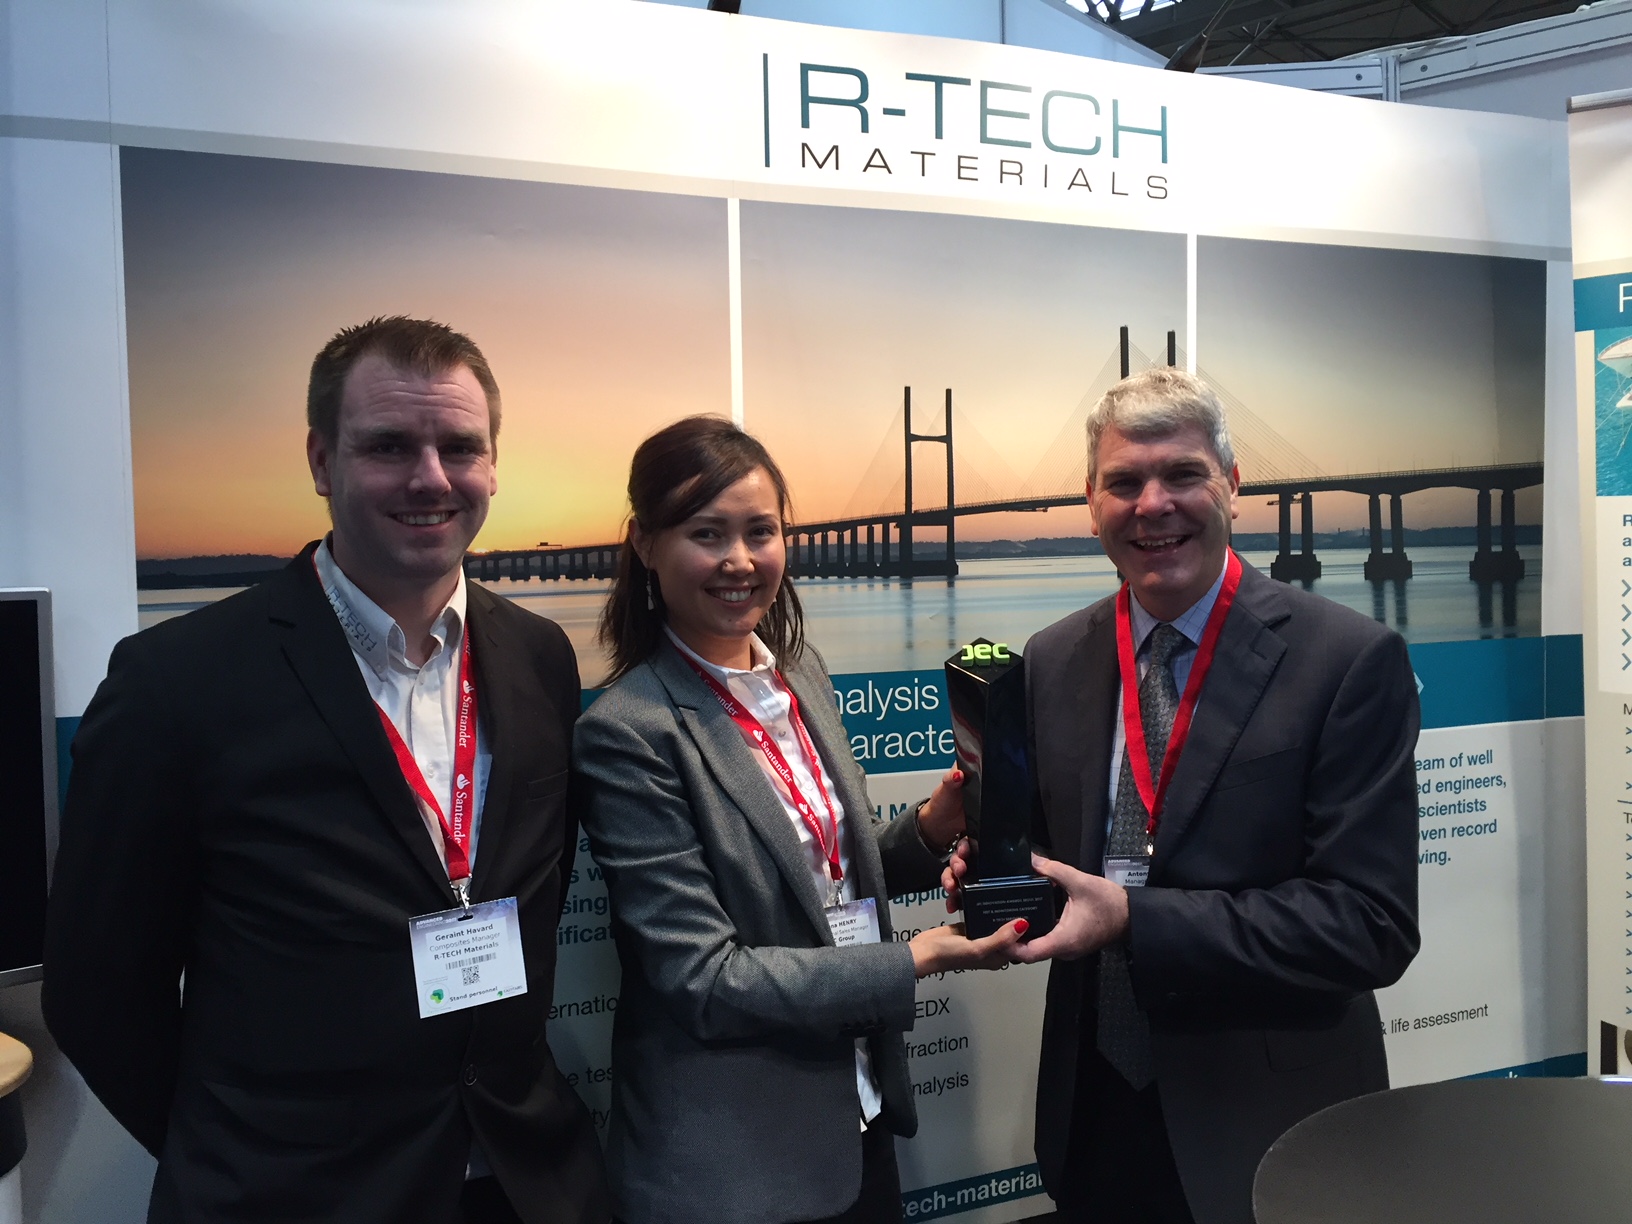 R-TECH Materials increased visitors to its stand by 350%.